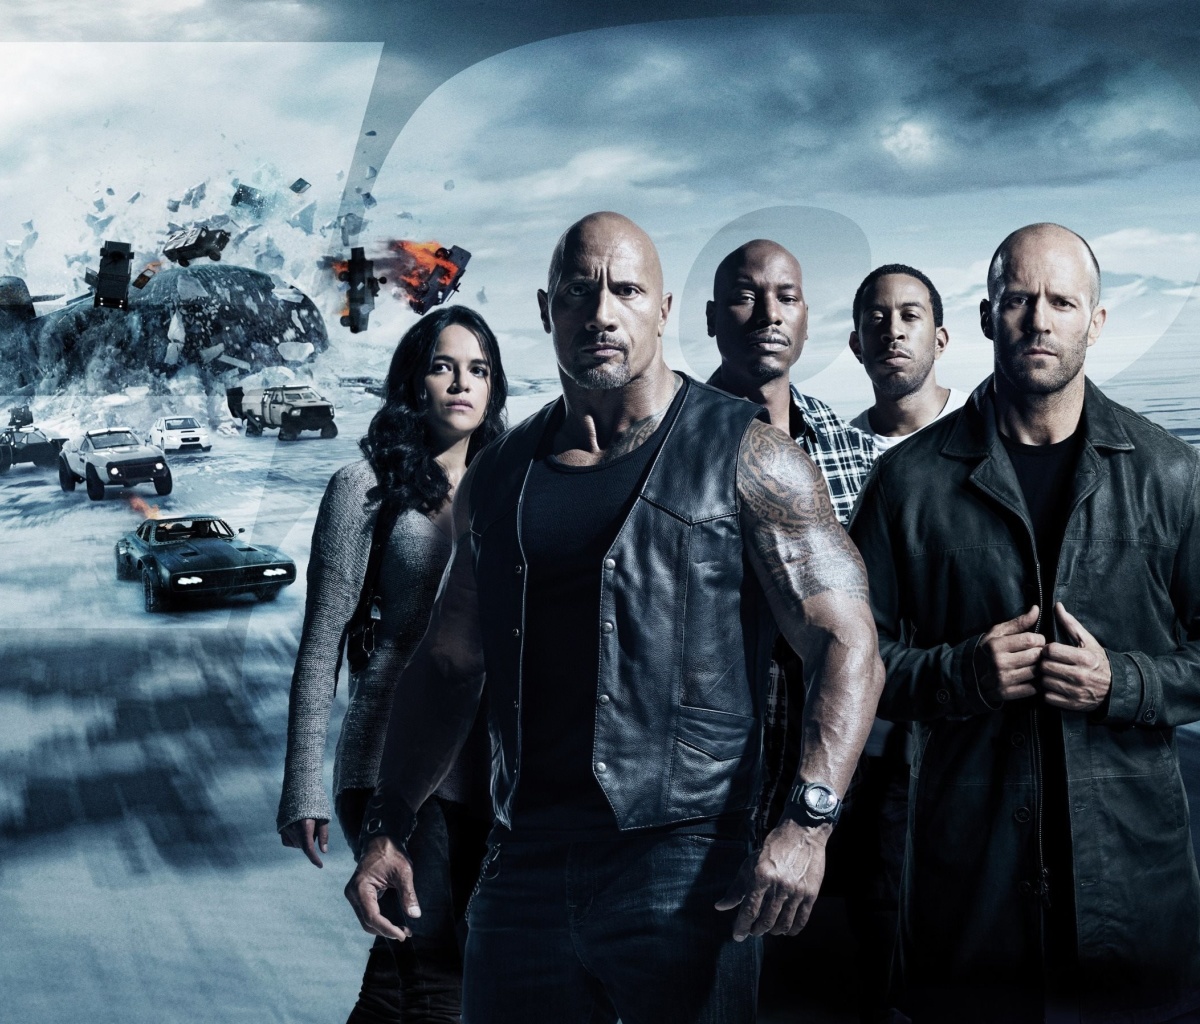 The Fate of the Furious with Vin Diesel, Dwayne Johnson, Charlize Theron wallpaper 1200x1024